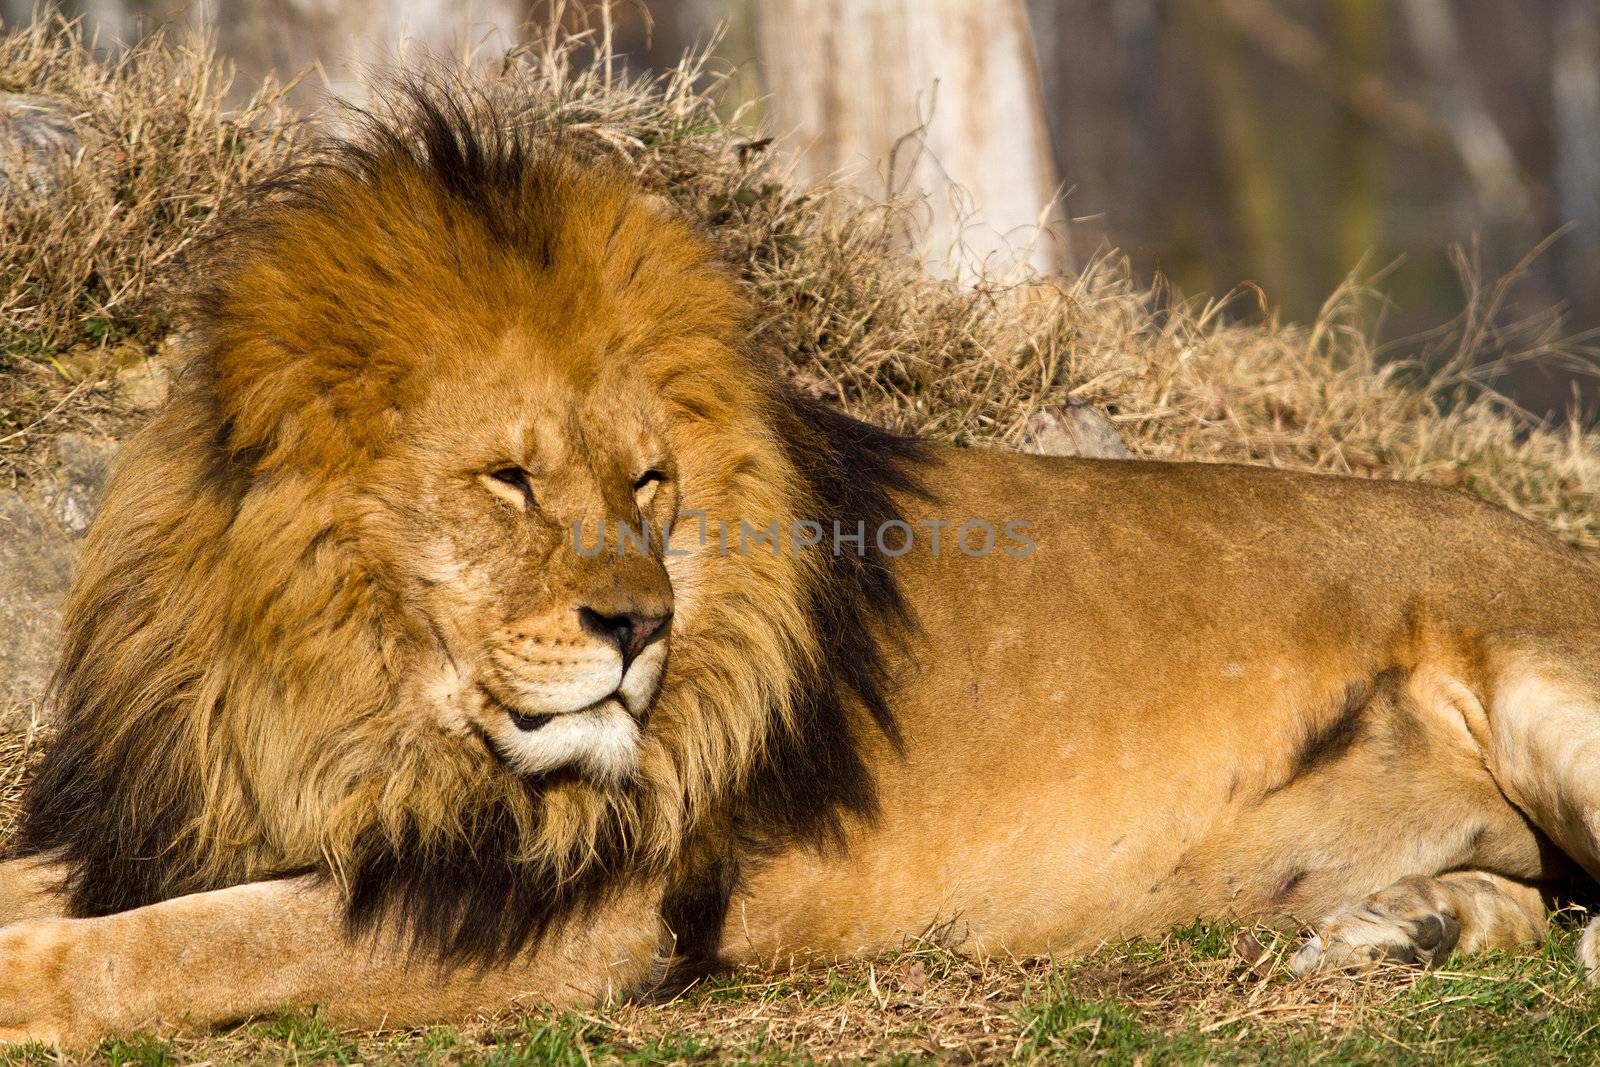 Lion the king by lsantilli